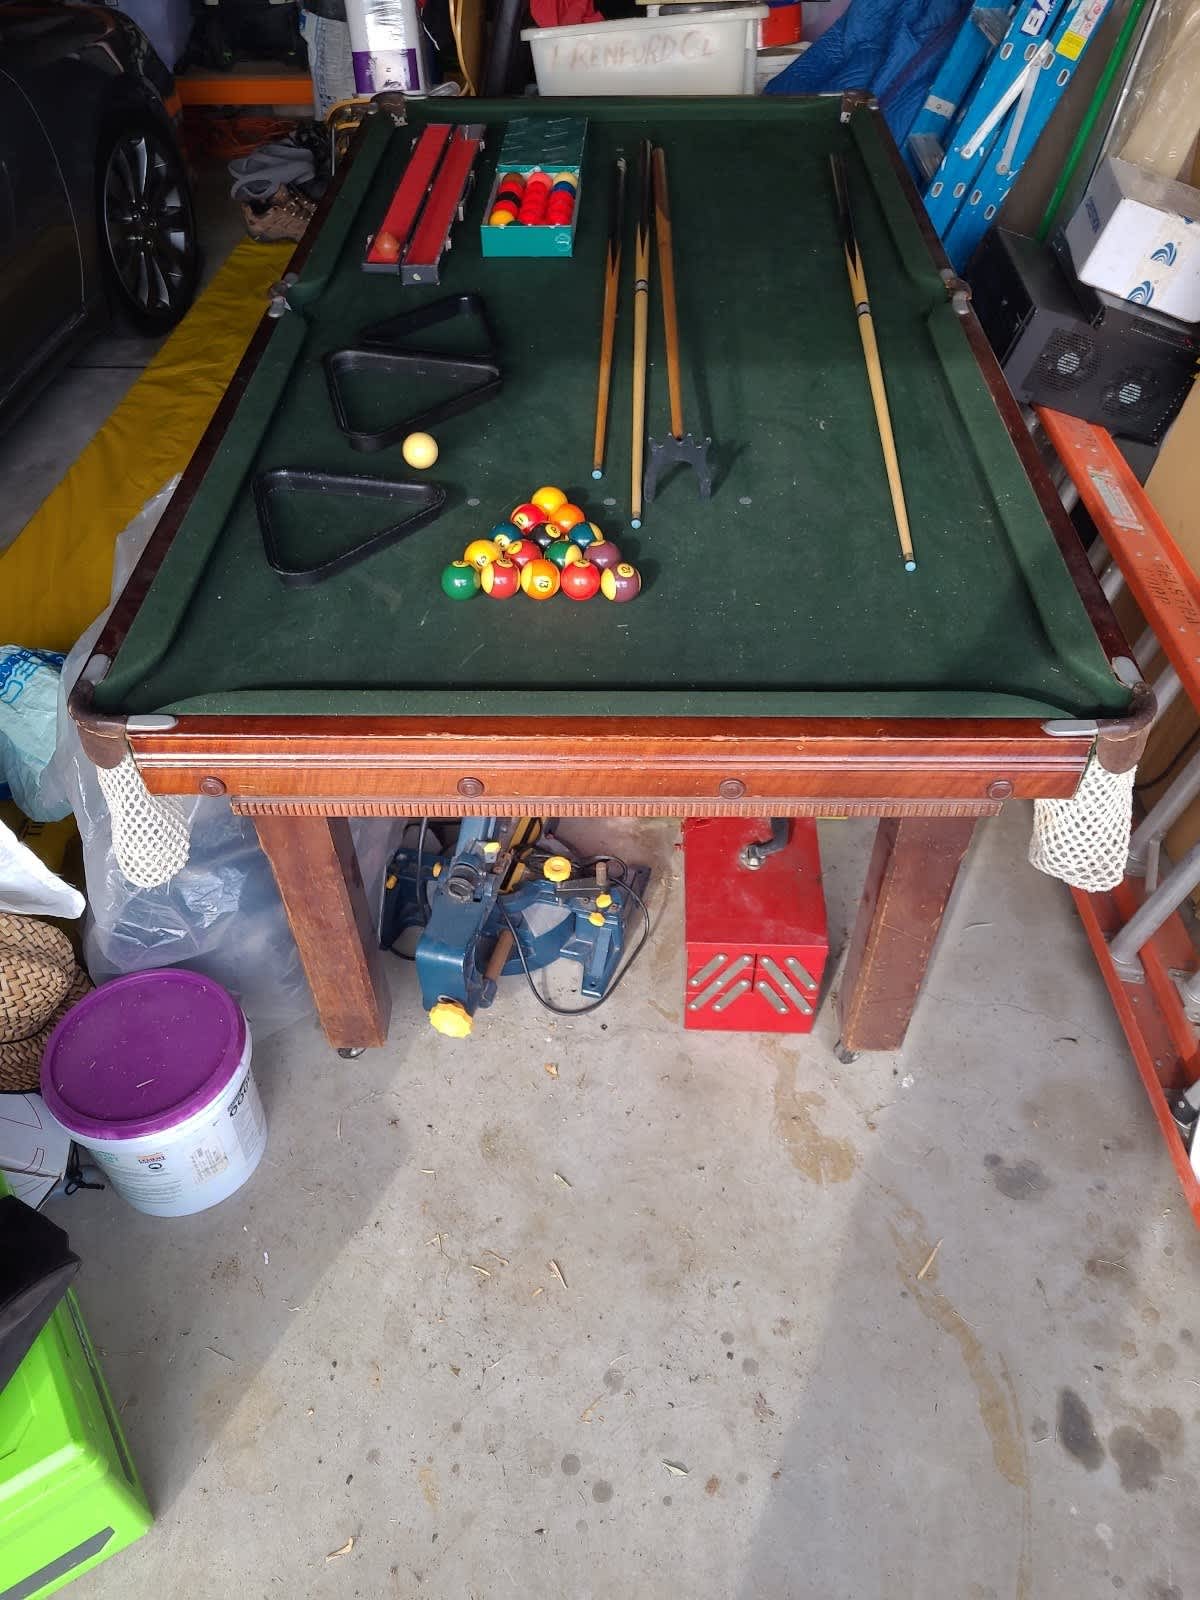 snooker cue in Sydney Region, NSW Other Sports and Fitness Gumtree Australia Free Local Classifieds